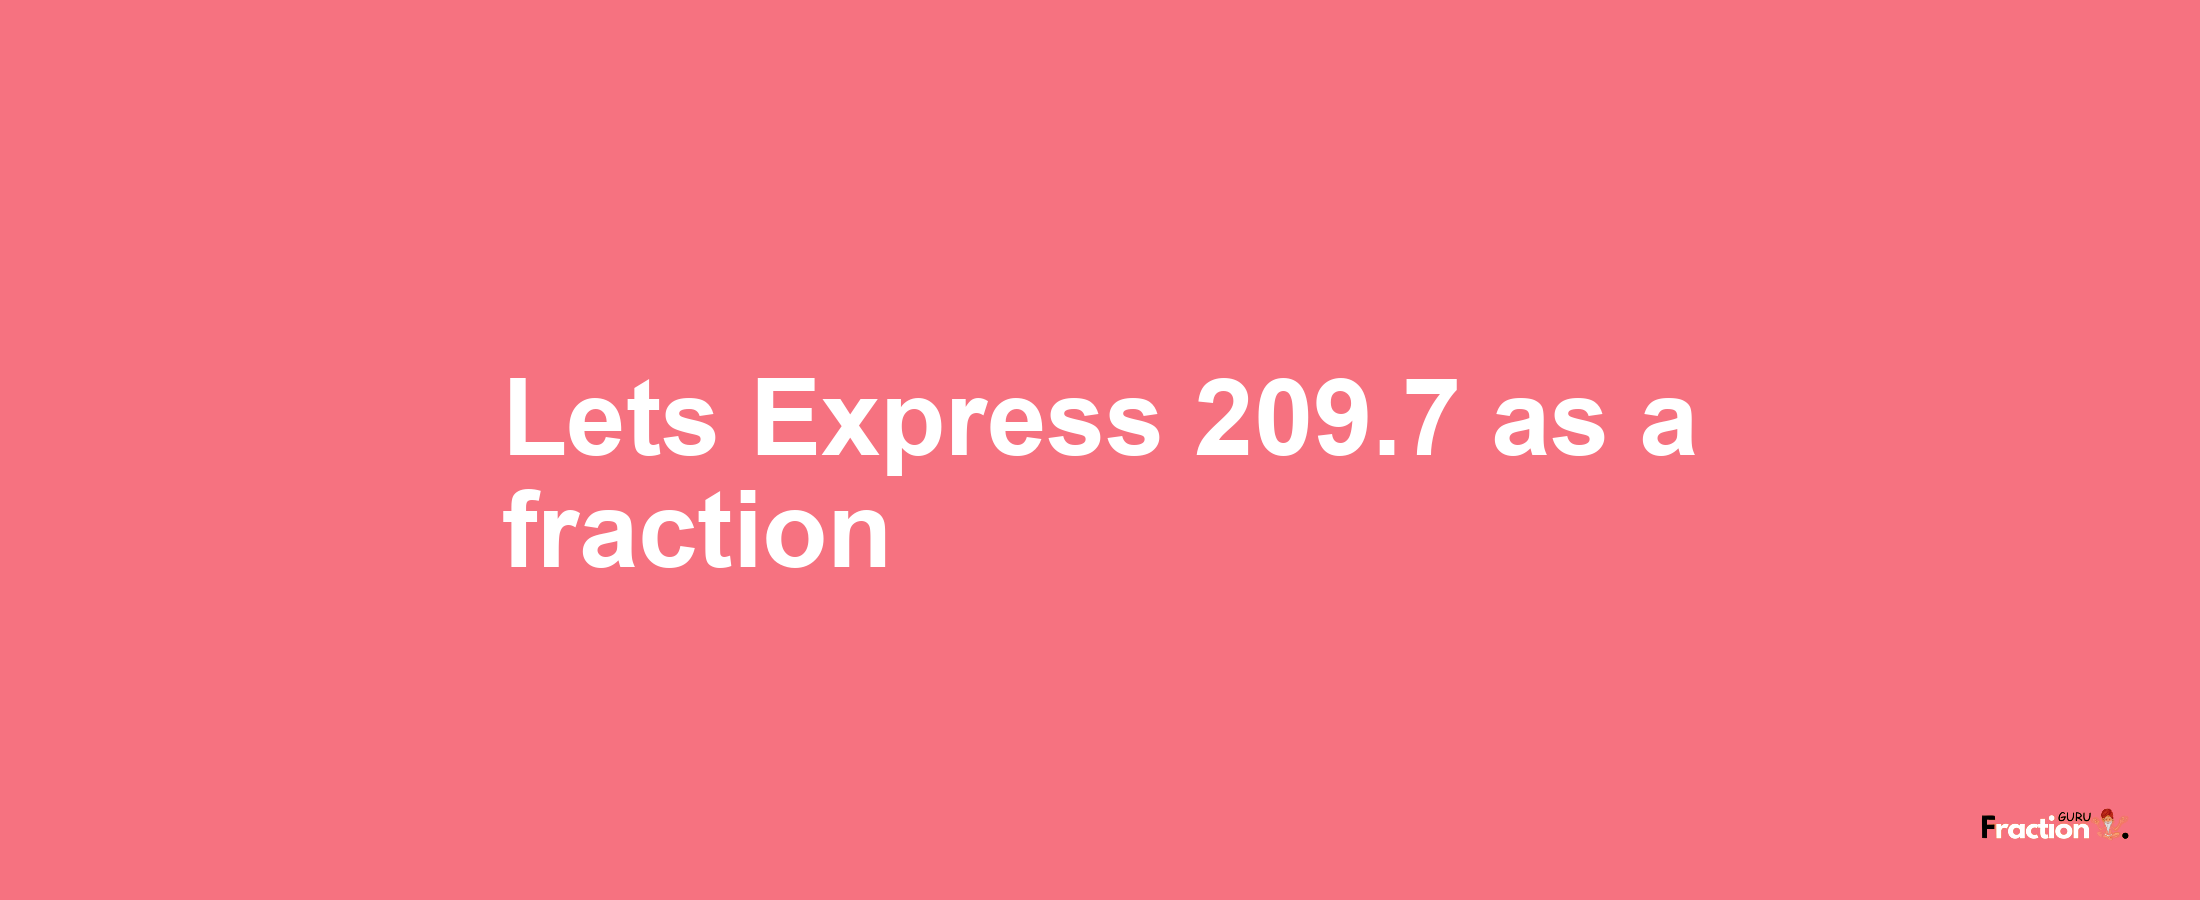 Lets Express 209.7 as afraction